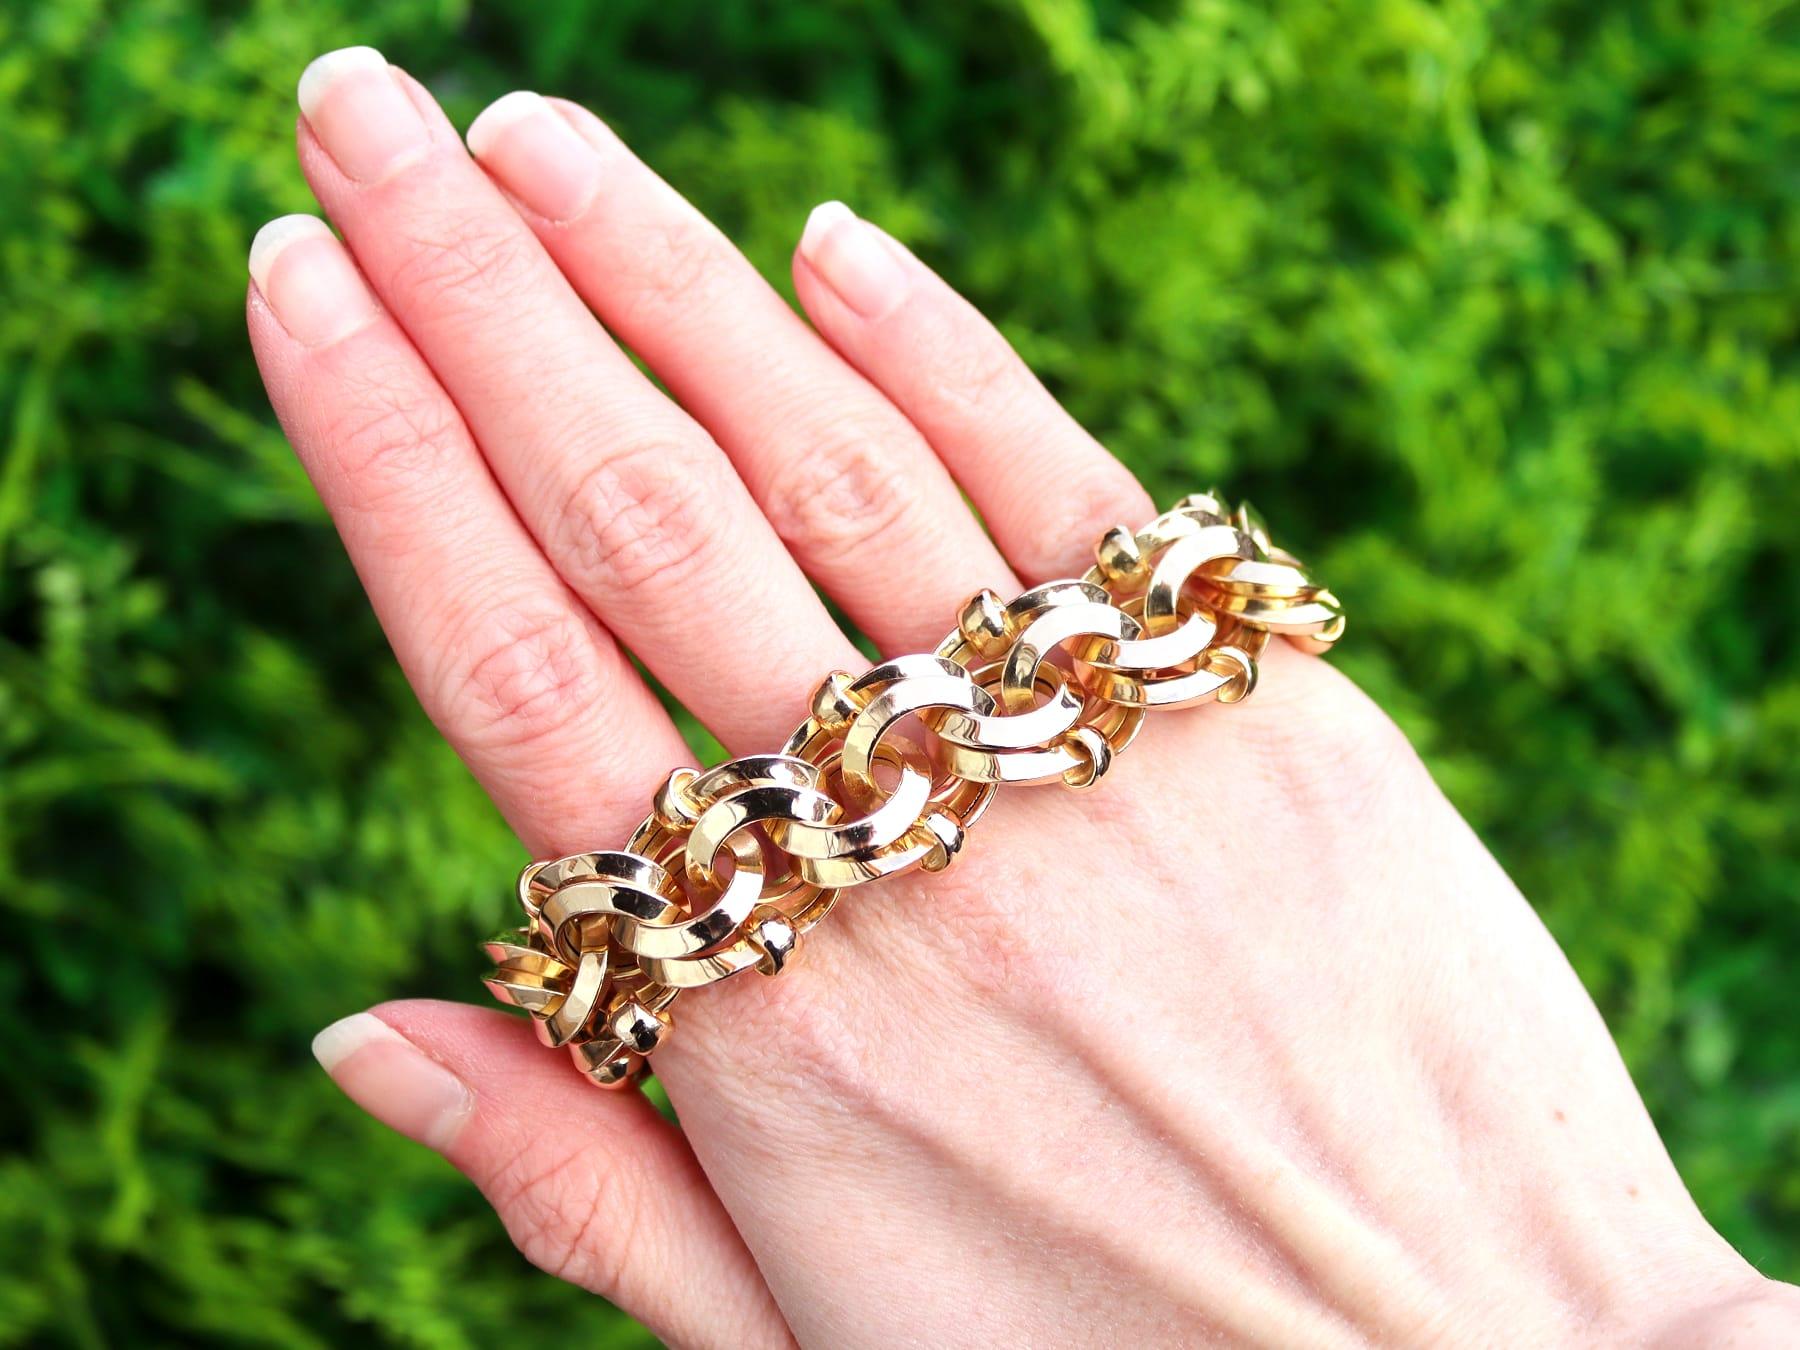 An exceptional, fine and impressive vintage French 18 karat yellow gold bracelet; part of our diverse vintage jewelry and estate jewelry collections.

This exceptional, fine and impressive vintage gold bracelet has been crafted in 18k yellow